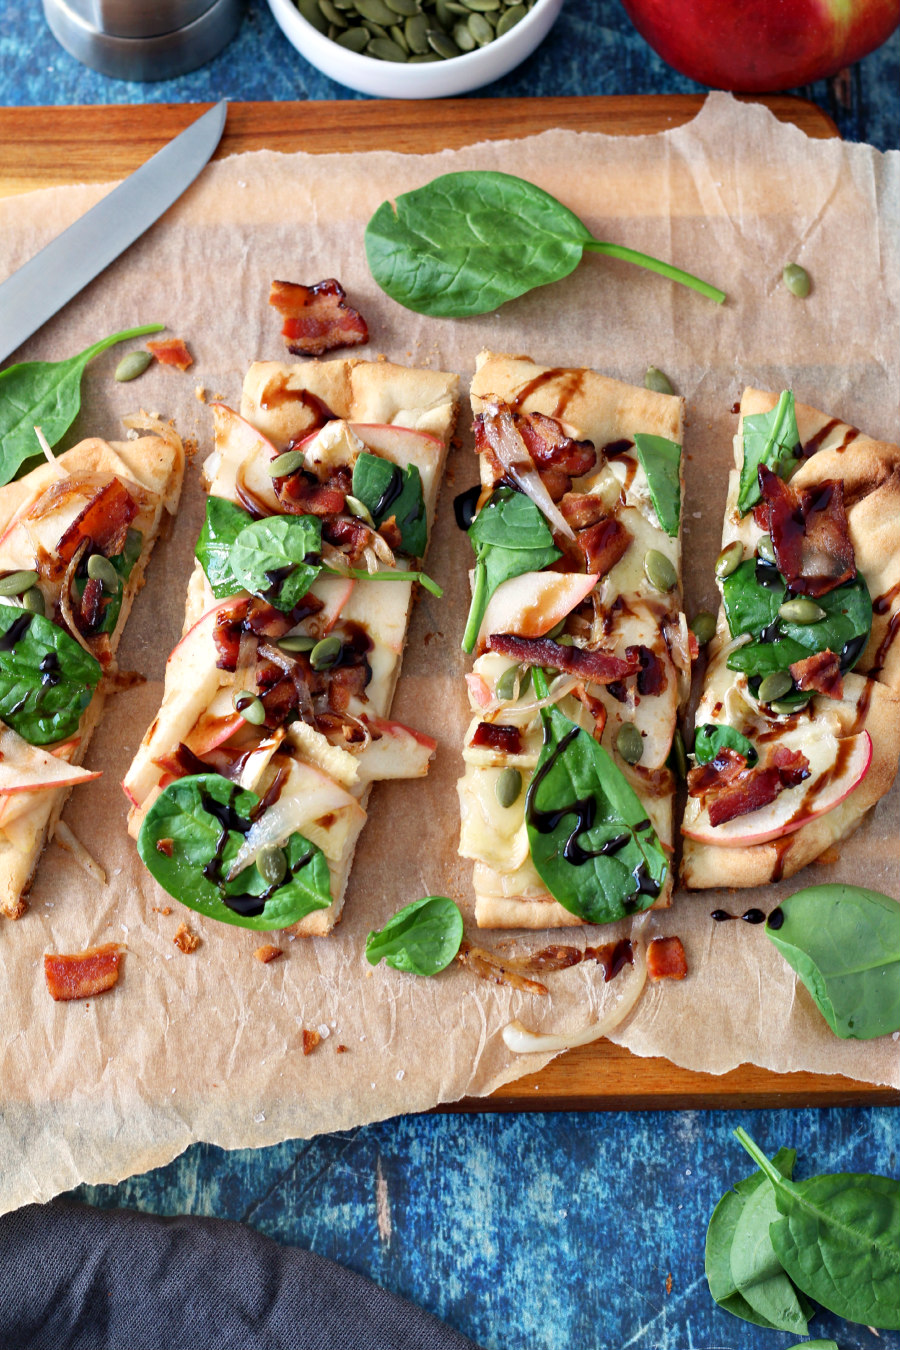 Flat lay photo of Apple, Bacon, and Brie Flatbread cut into pieces on a parchment lined wooden board. Knife, sits next to flatbread along with scattered baby spinach, crumbled bacon, and pepitas